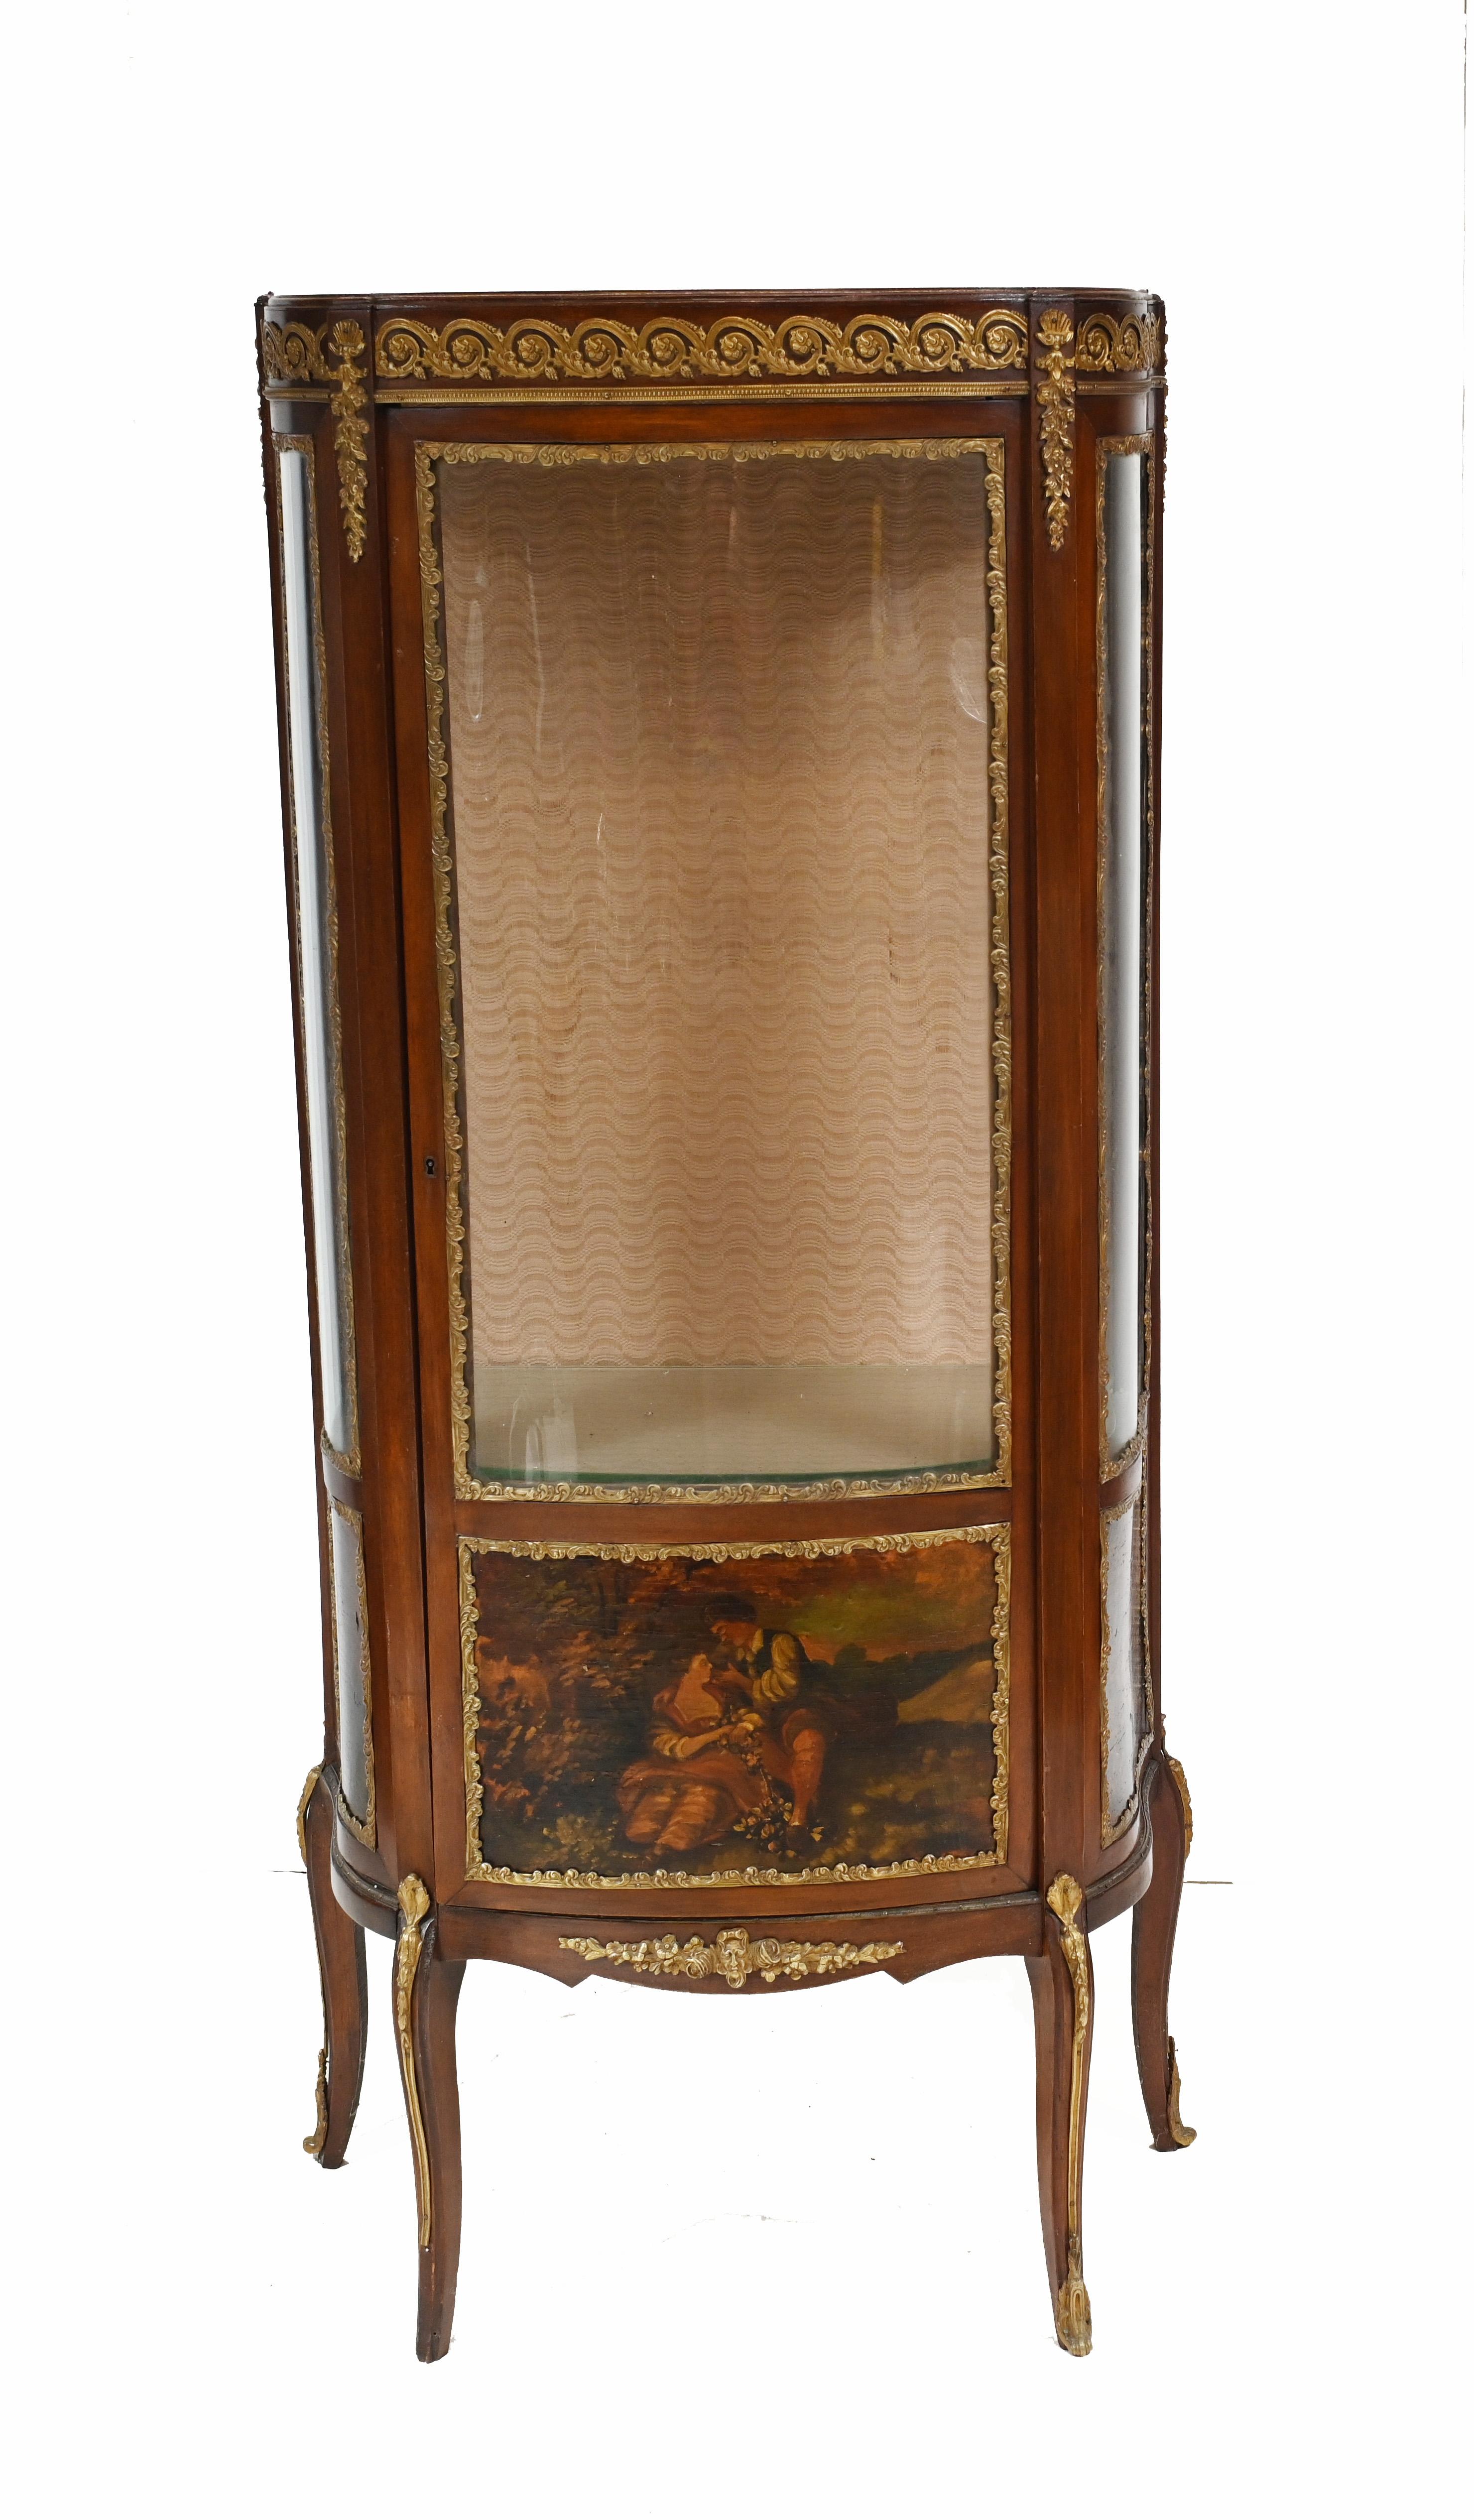 Gorgeous antique French Empire display cabinet or bijouterie
We date this wonderful antique to circa 1910
Lovely shape and interplay between colours of wood, ormolu and red felt lined interior
Purchased from Les Puces flea market in Paris
Hand